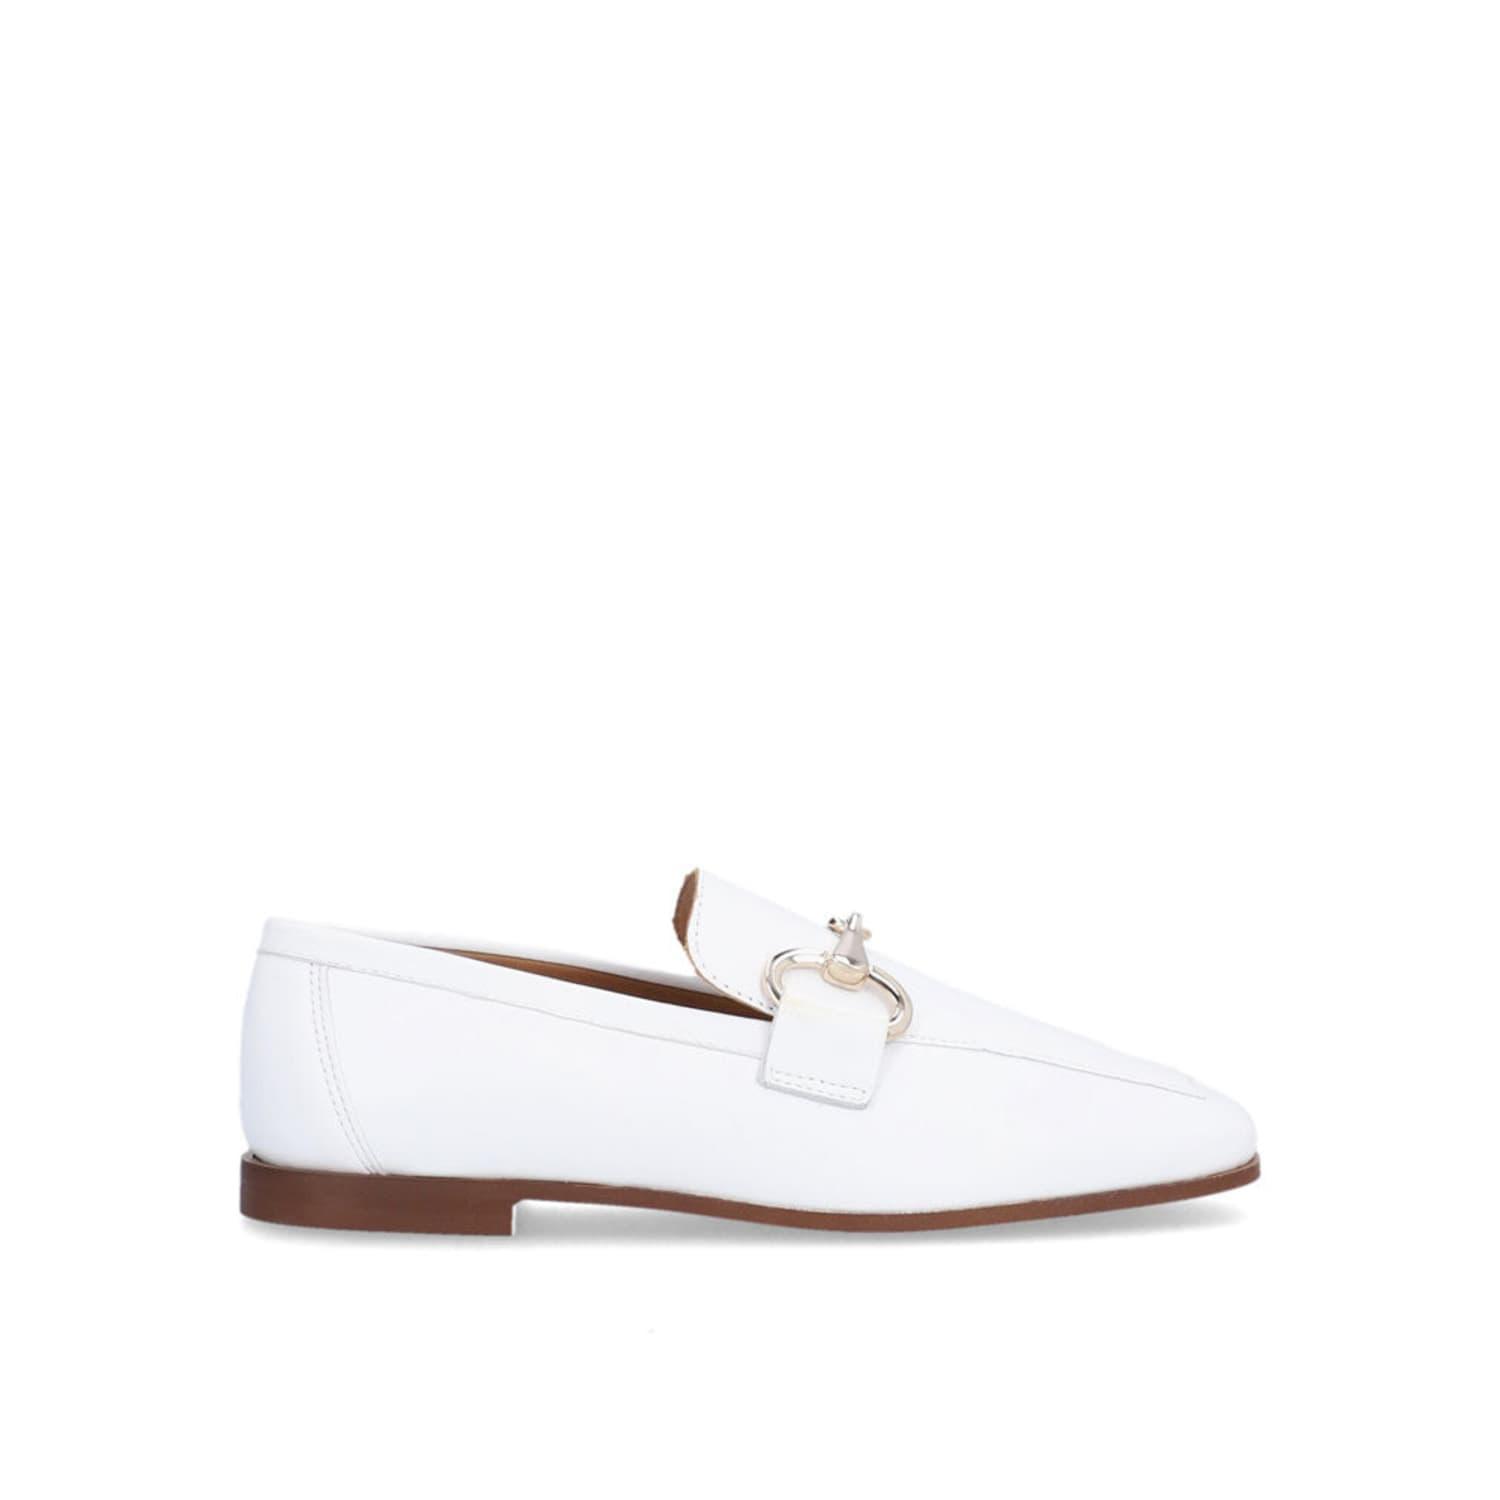 Alpe White New Roma Shoes | Lyst